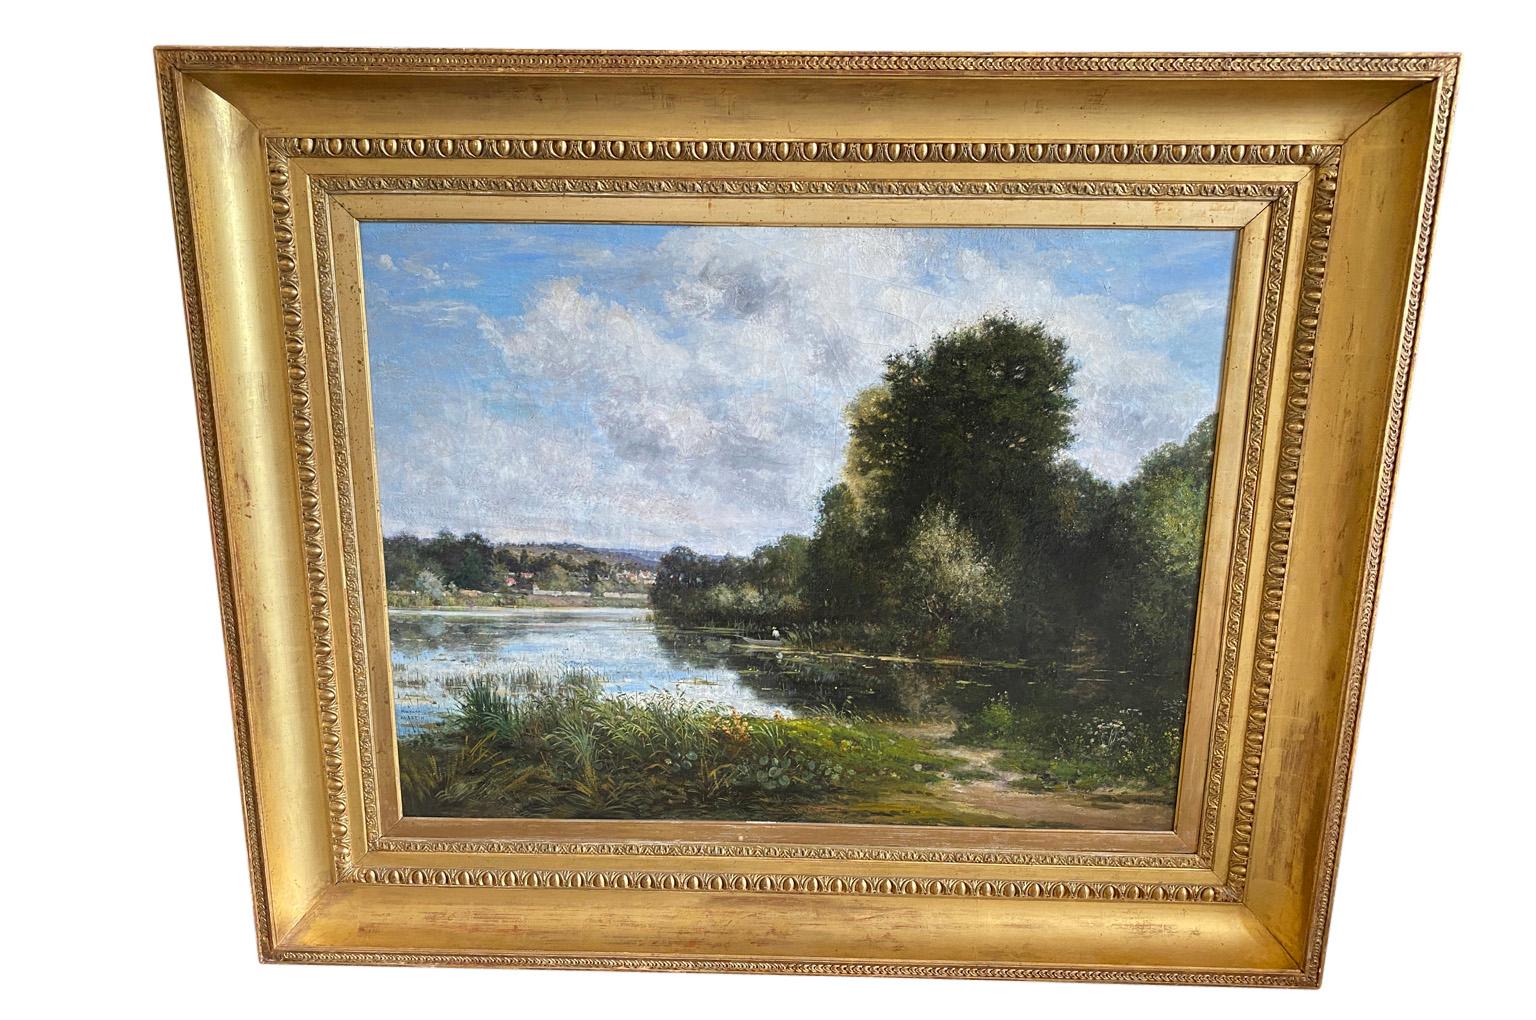 A very stunning and grand scale Barbizon Oil Painting from the mid-19th century origining near Normandy, France. Wonderful detailing and brushwork. This beautiful painting is housed in an equally beautiful frame.